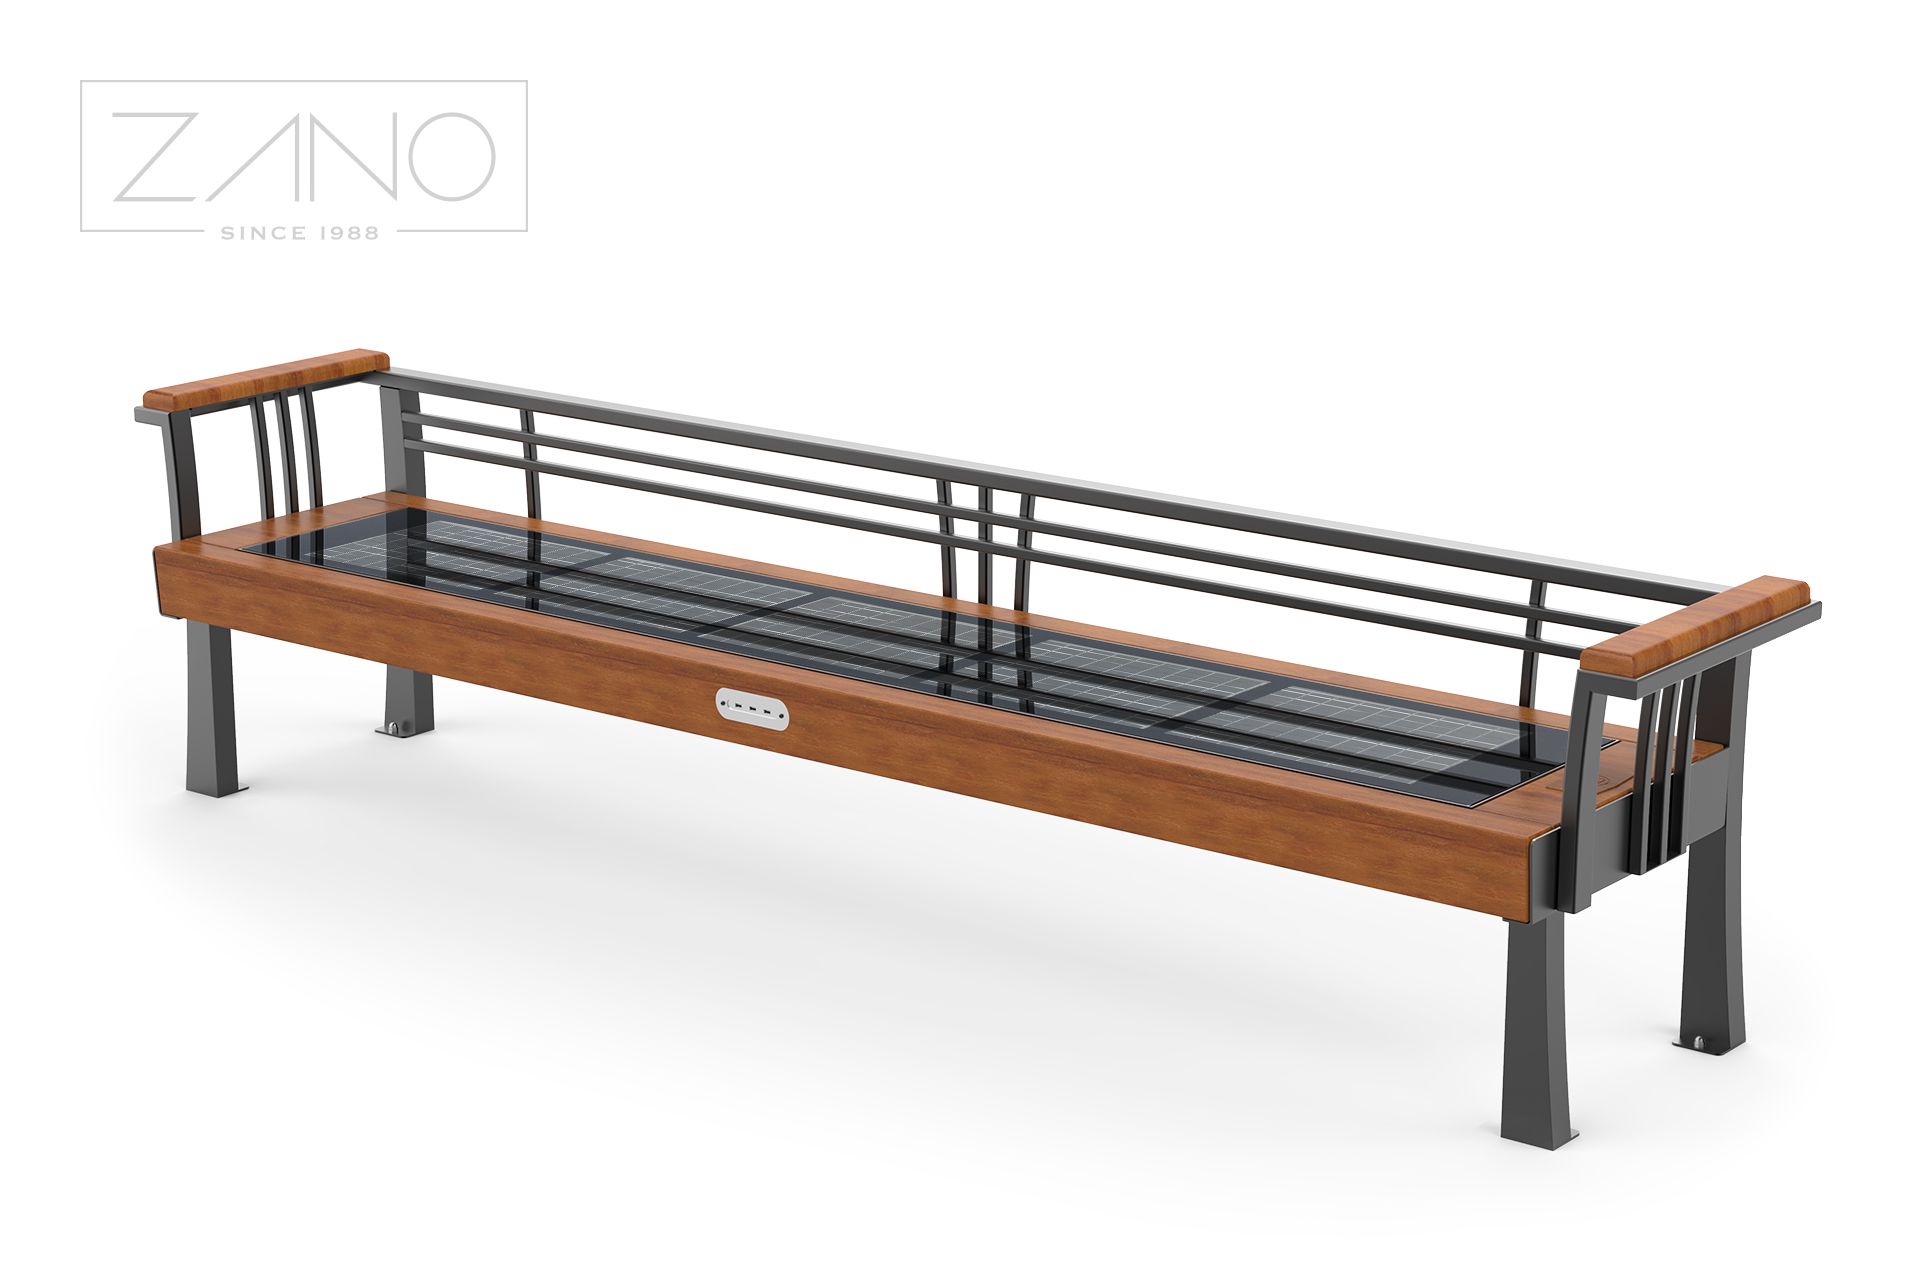 Solid and durable outdoor bench with photovoltaic panels made of steel and hardwood